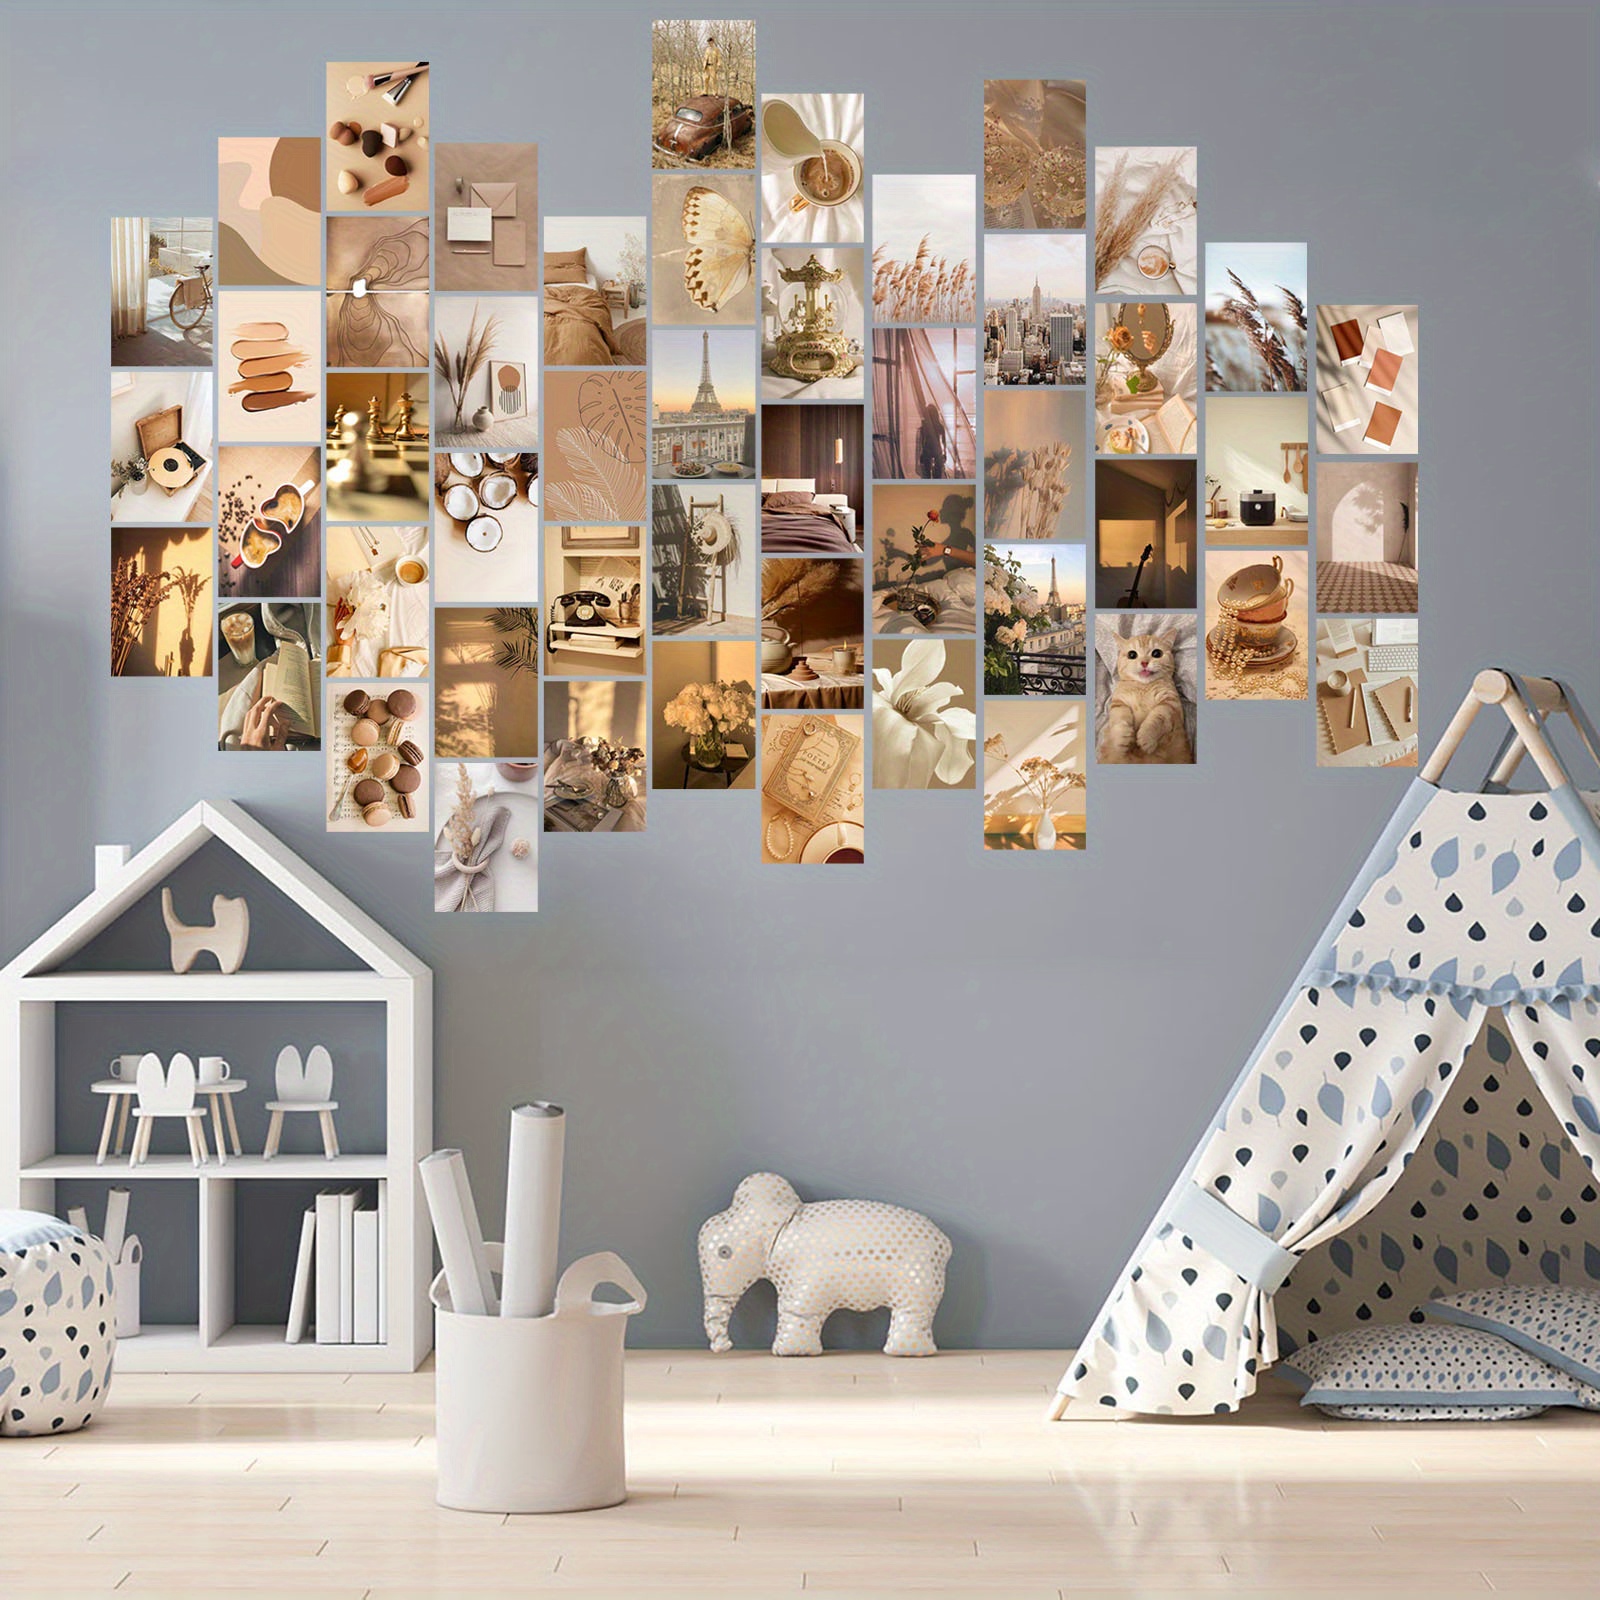 Design Your Own Wall Collage Craft Kit